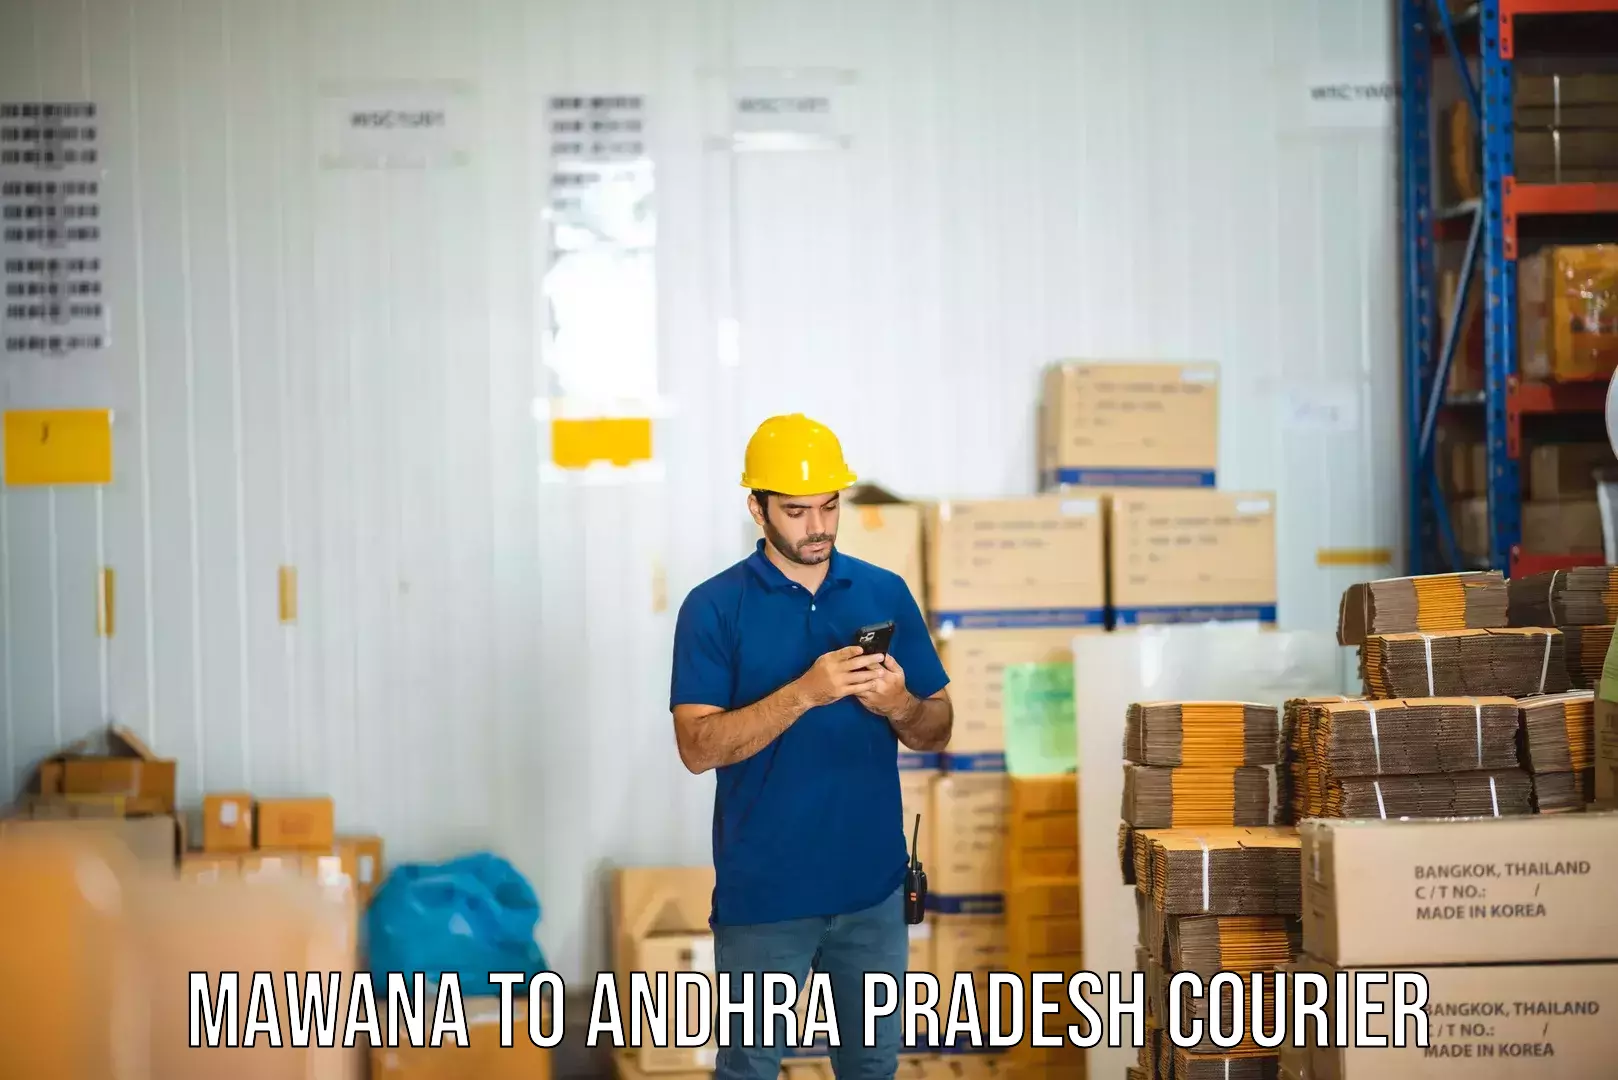 Next-day delivery options Mawana to Andhra Pradesh